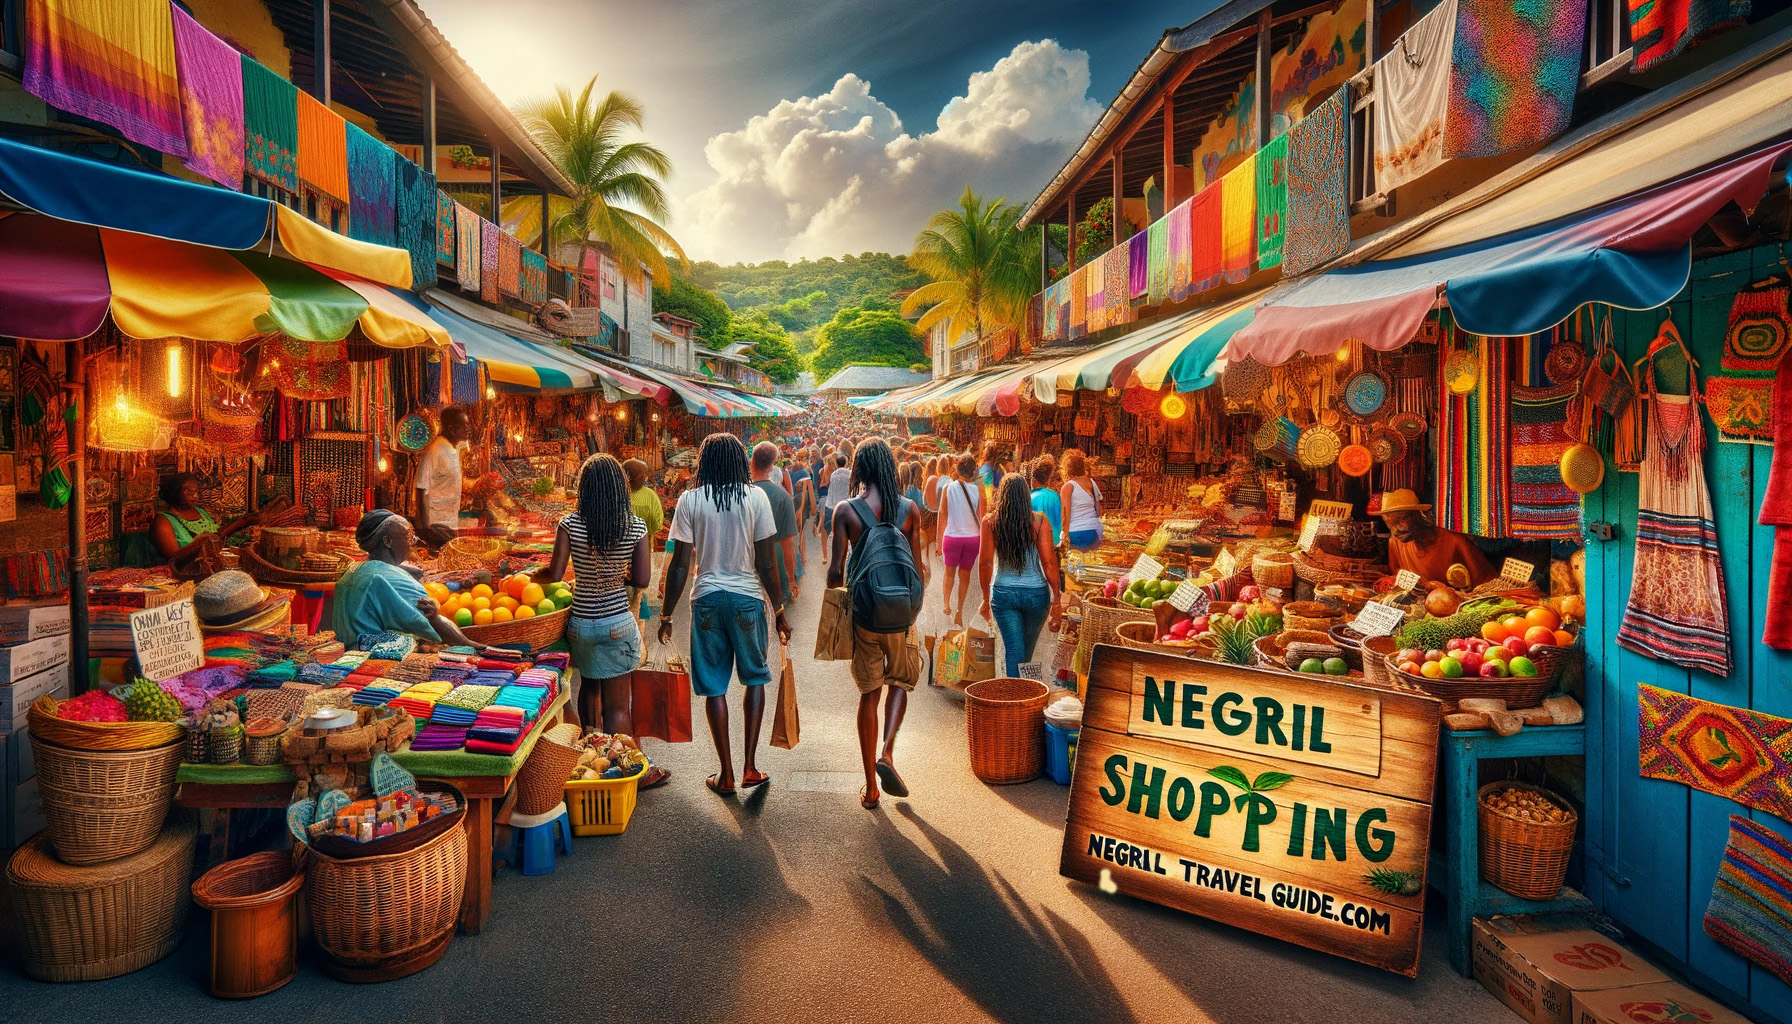 Negril Shopping - Shopping in Negril - Negril Travel Guide